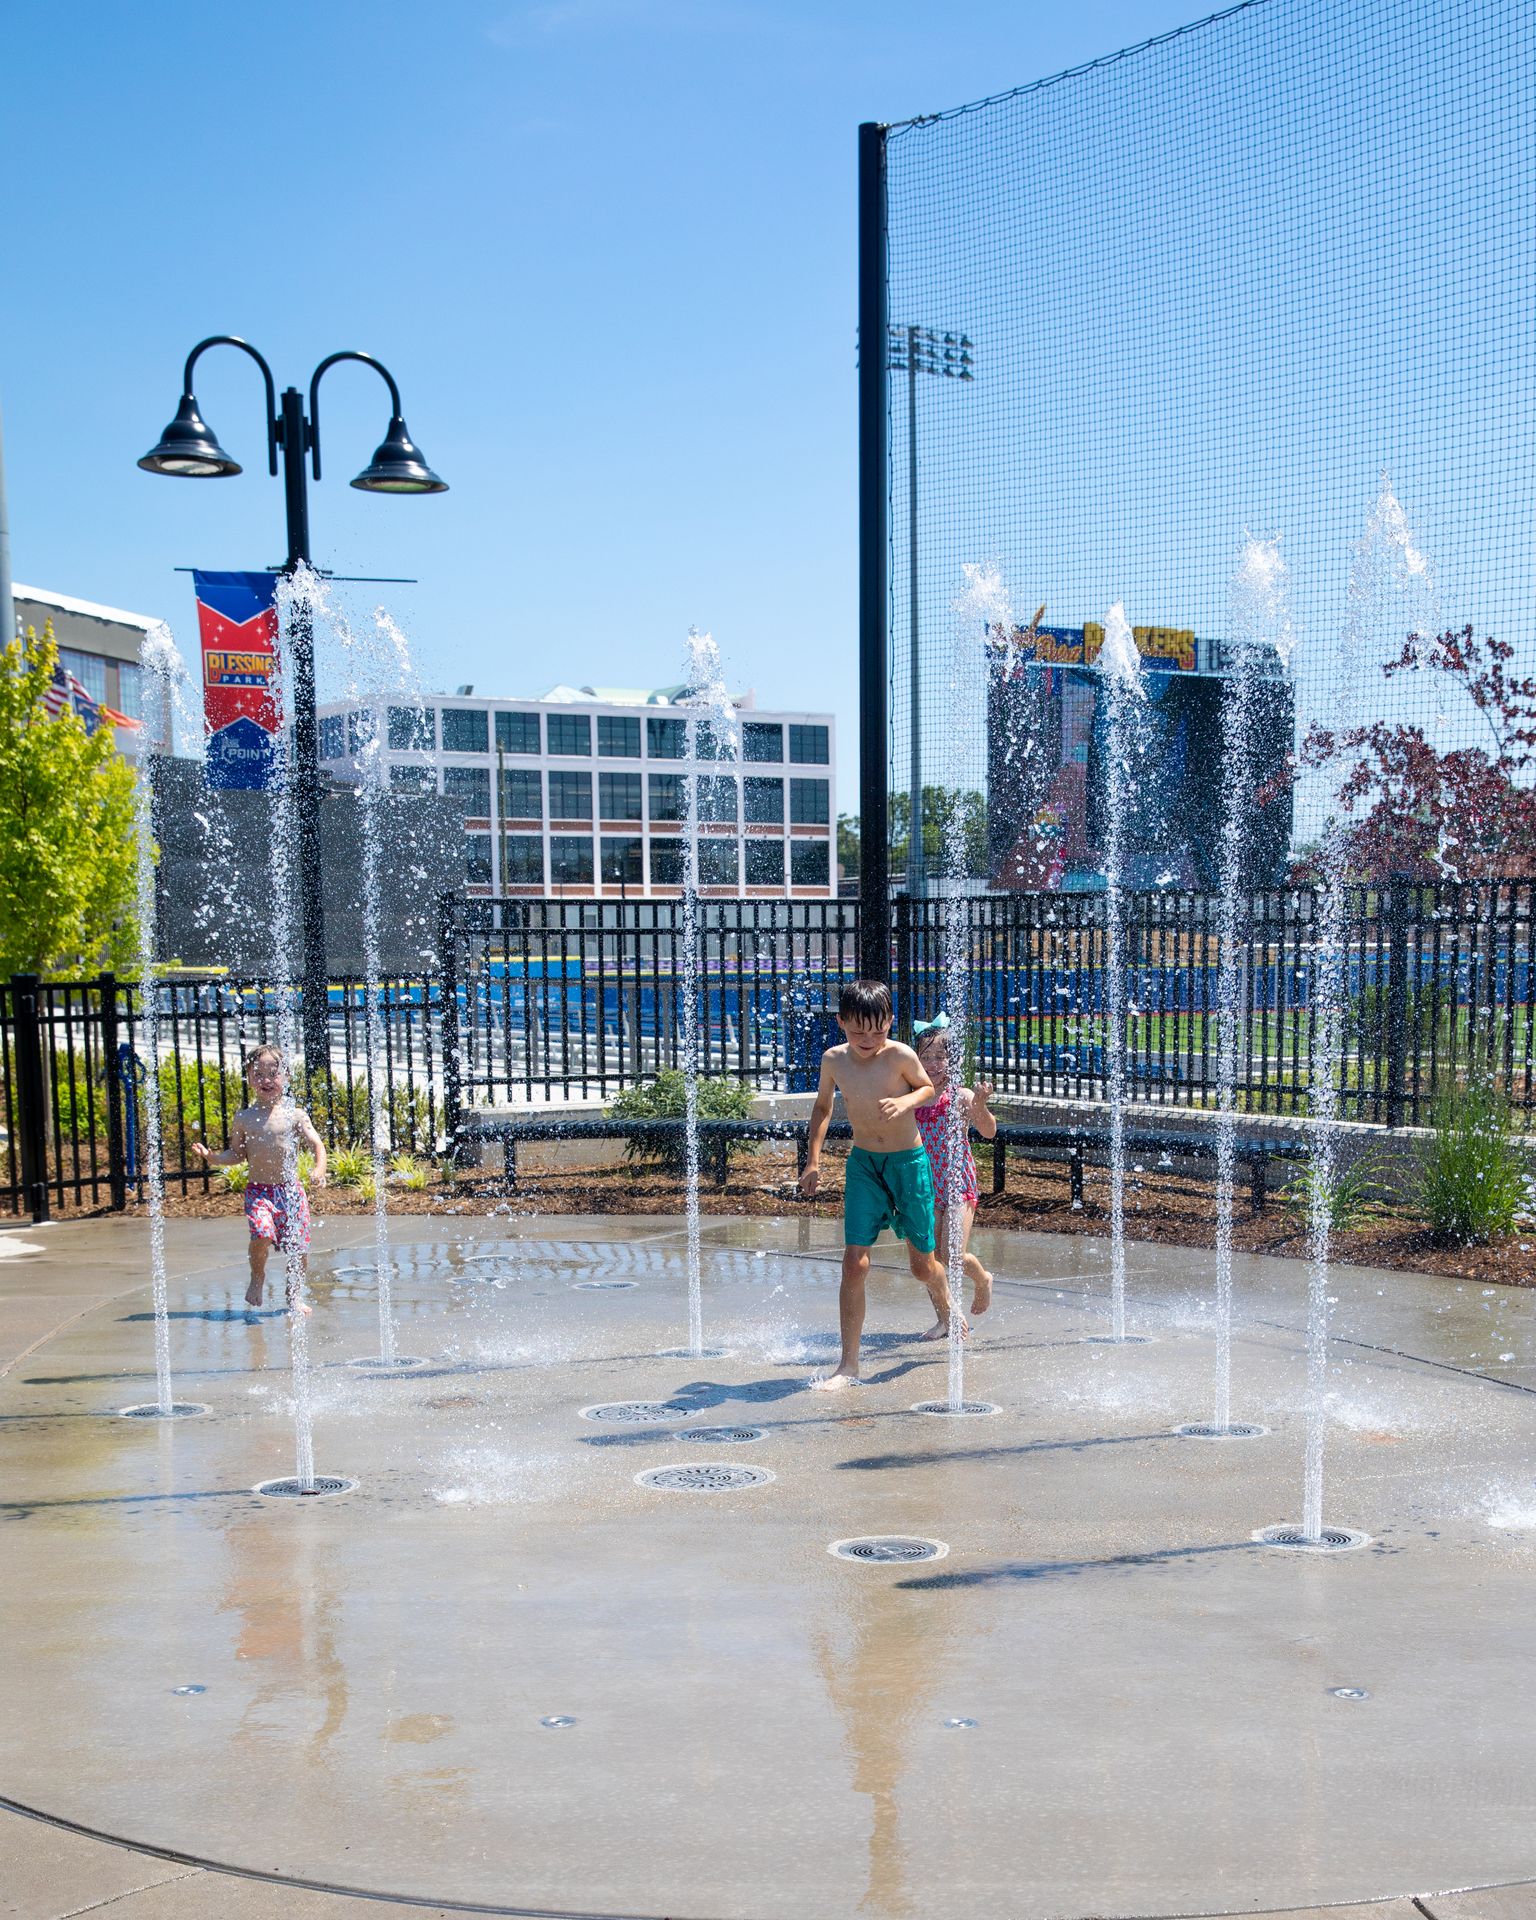 At Blessing Park in High Point, NC, kids play in the splash pad at the High Point Rockers stadium.